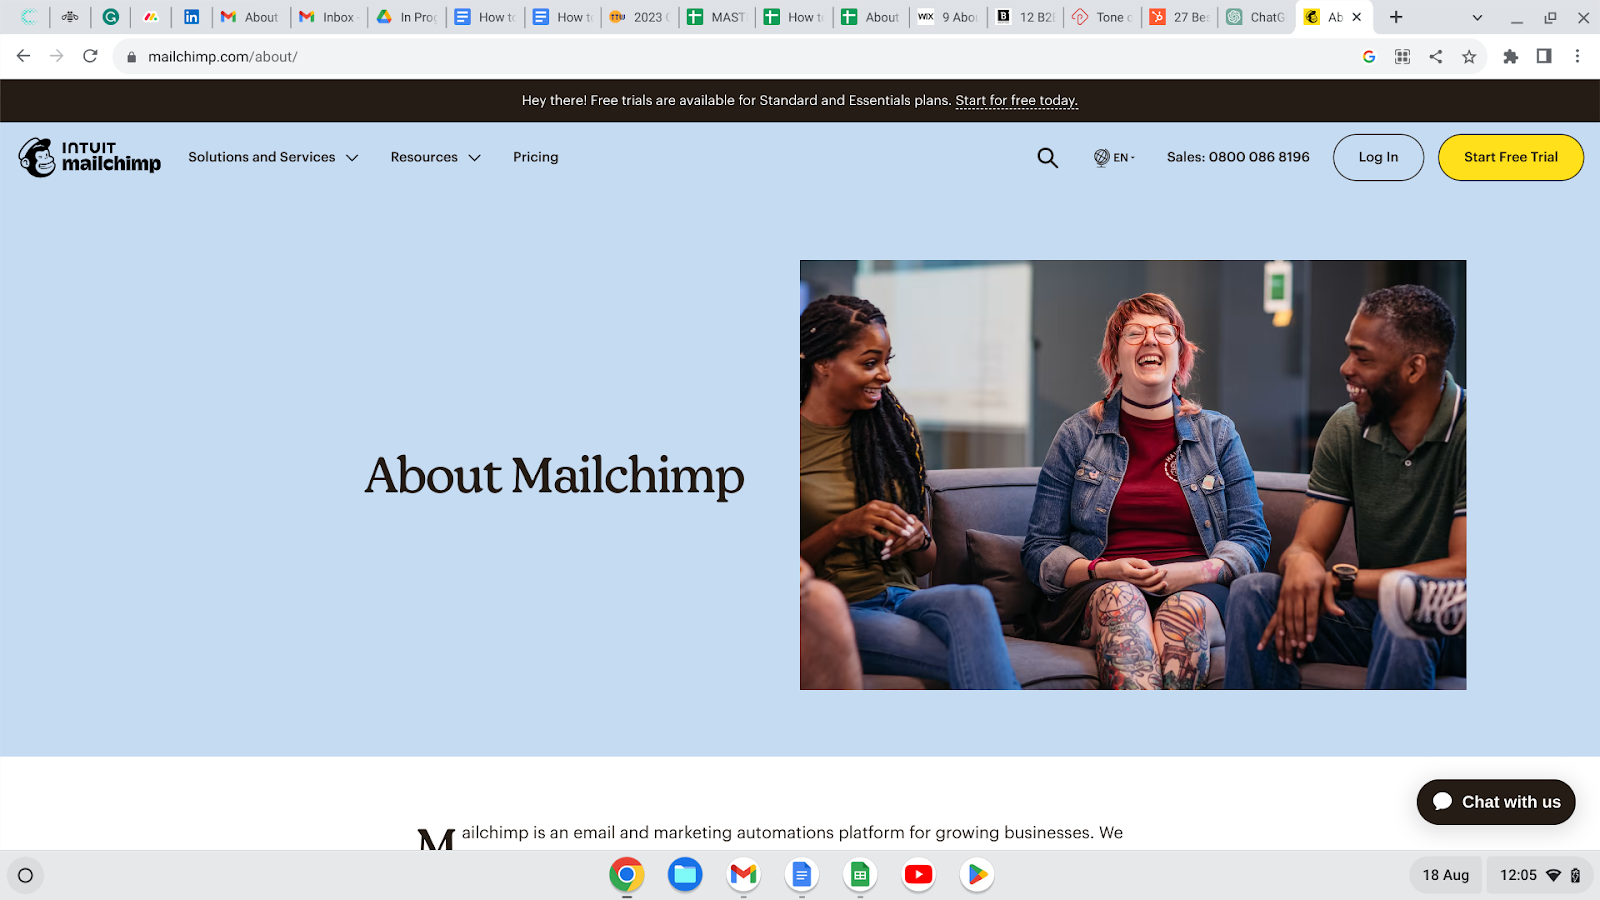 How to write an About page - Mailchimp's about page